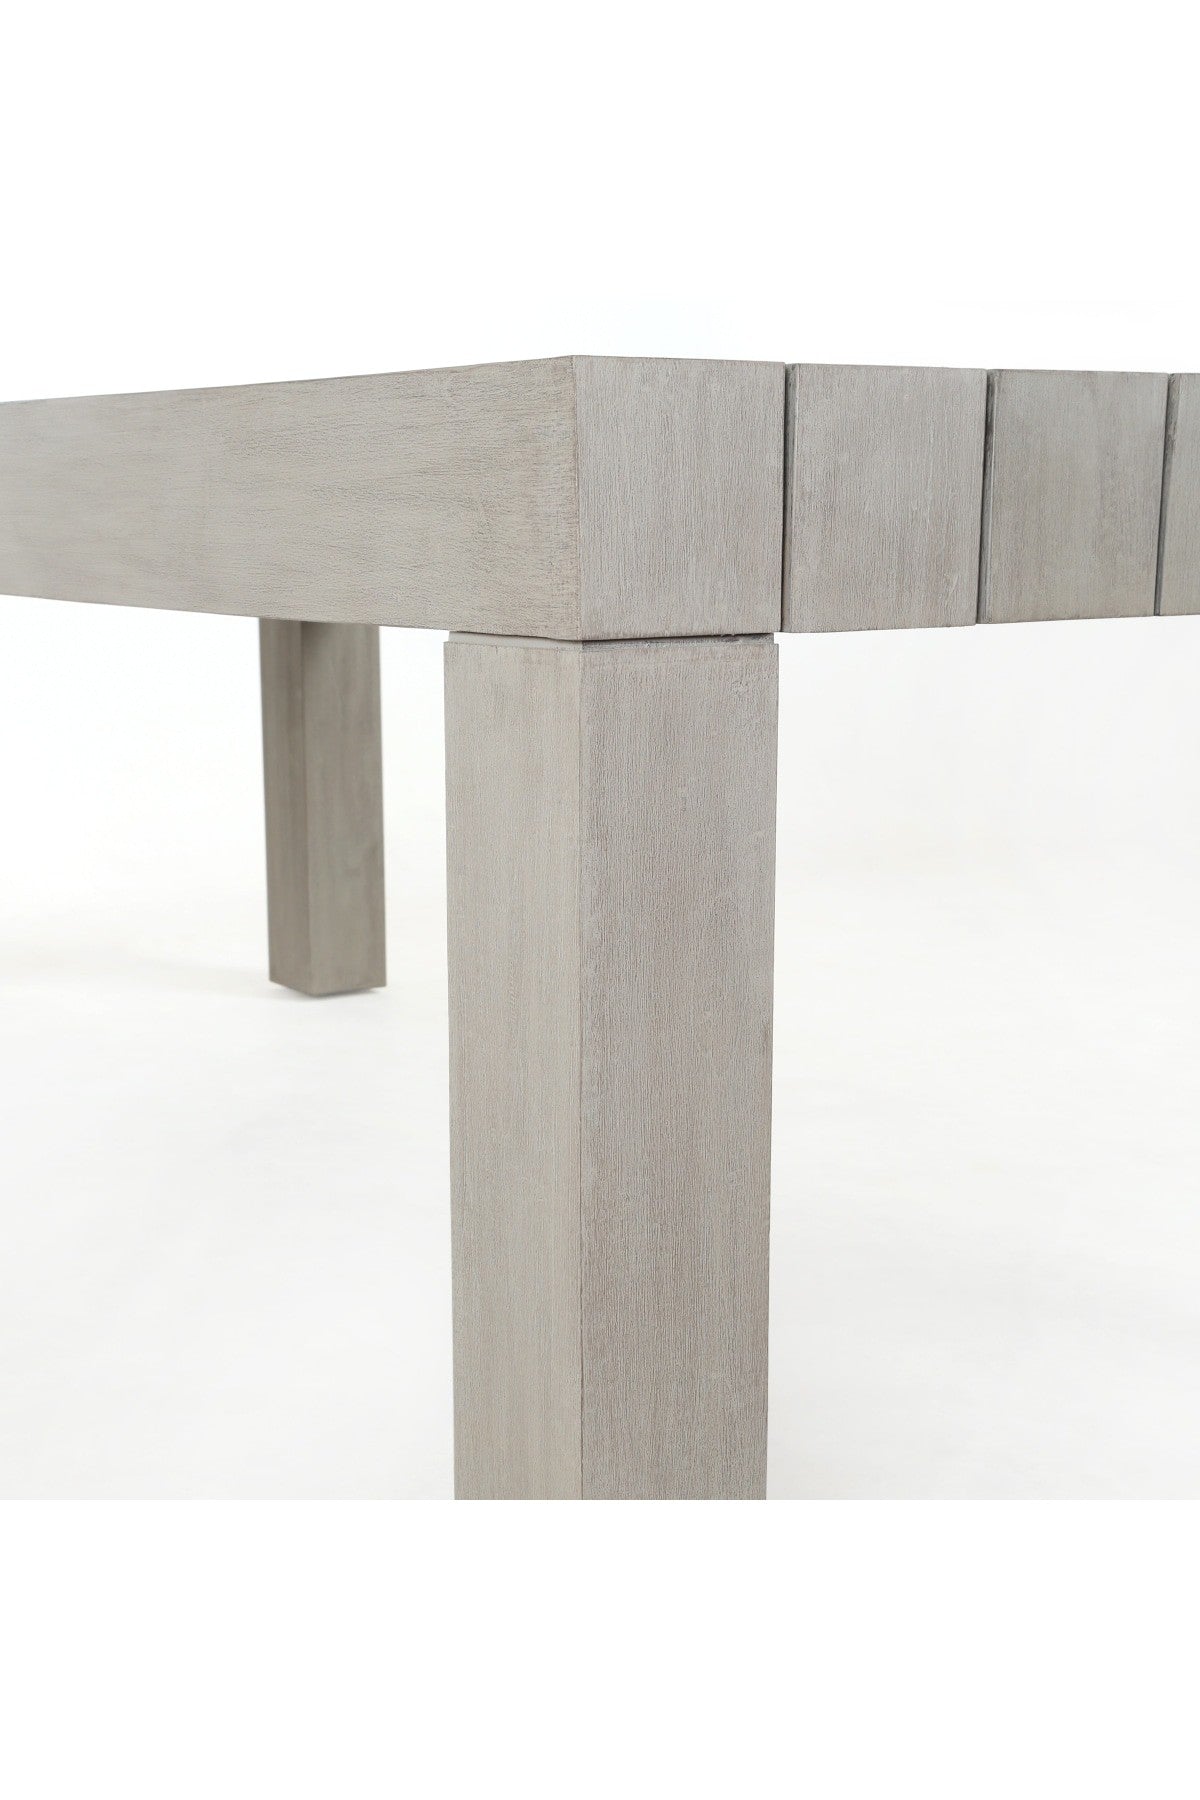 Carina Outdoor Dining Table - Weathered Grey